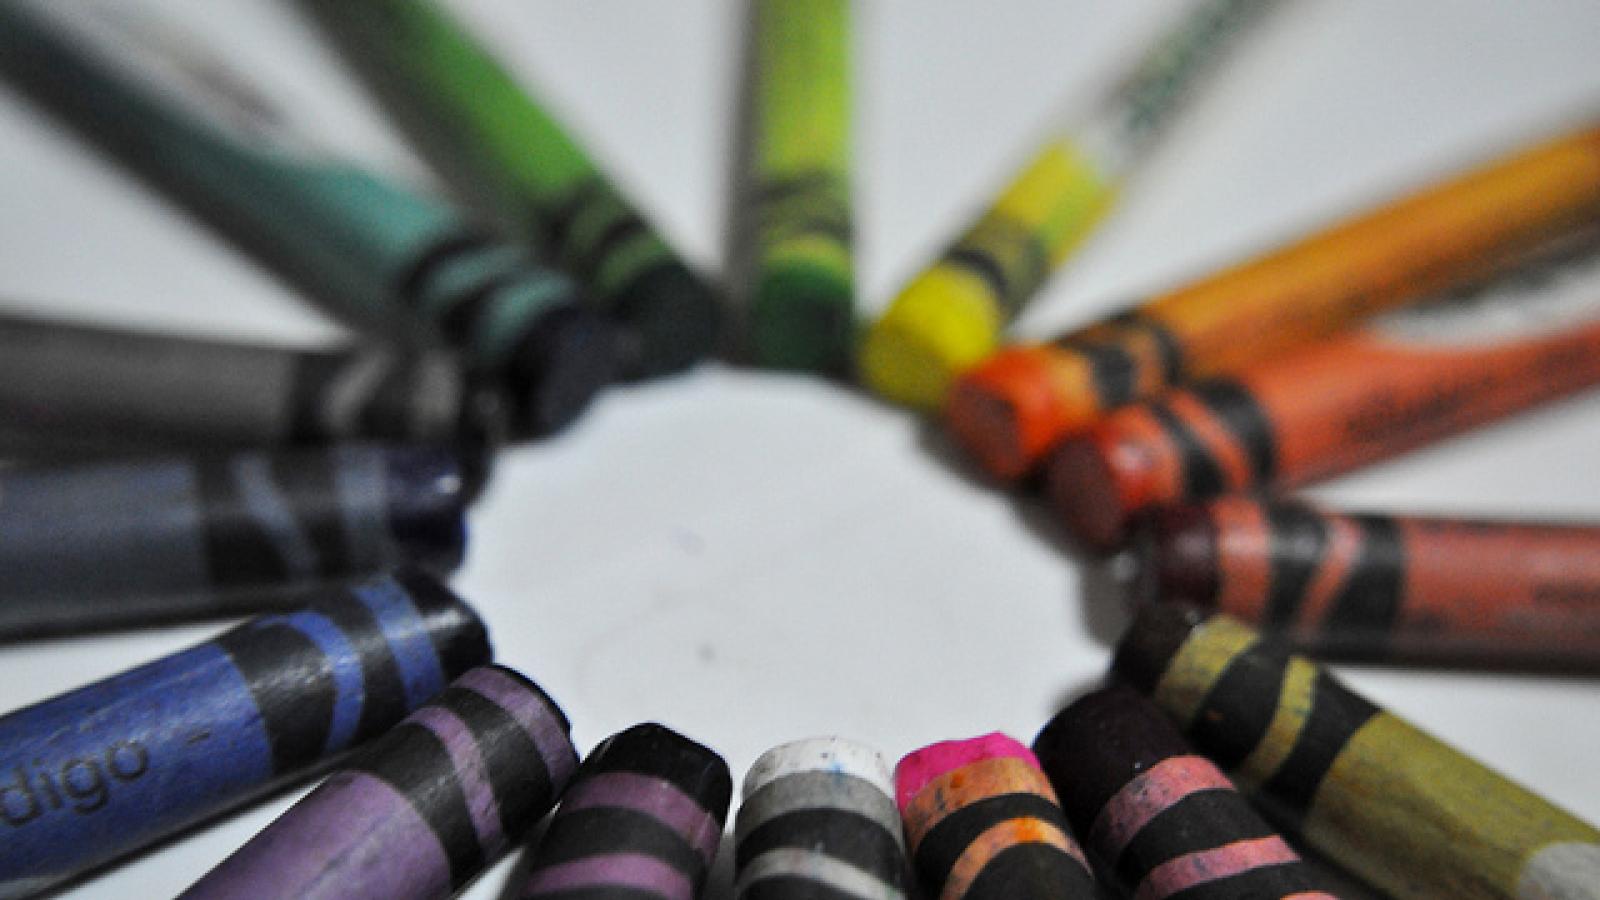 A circle of different colored crayons